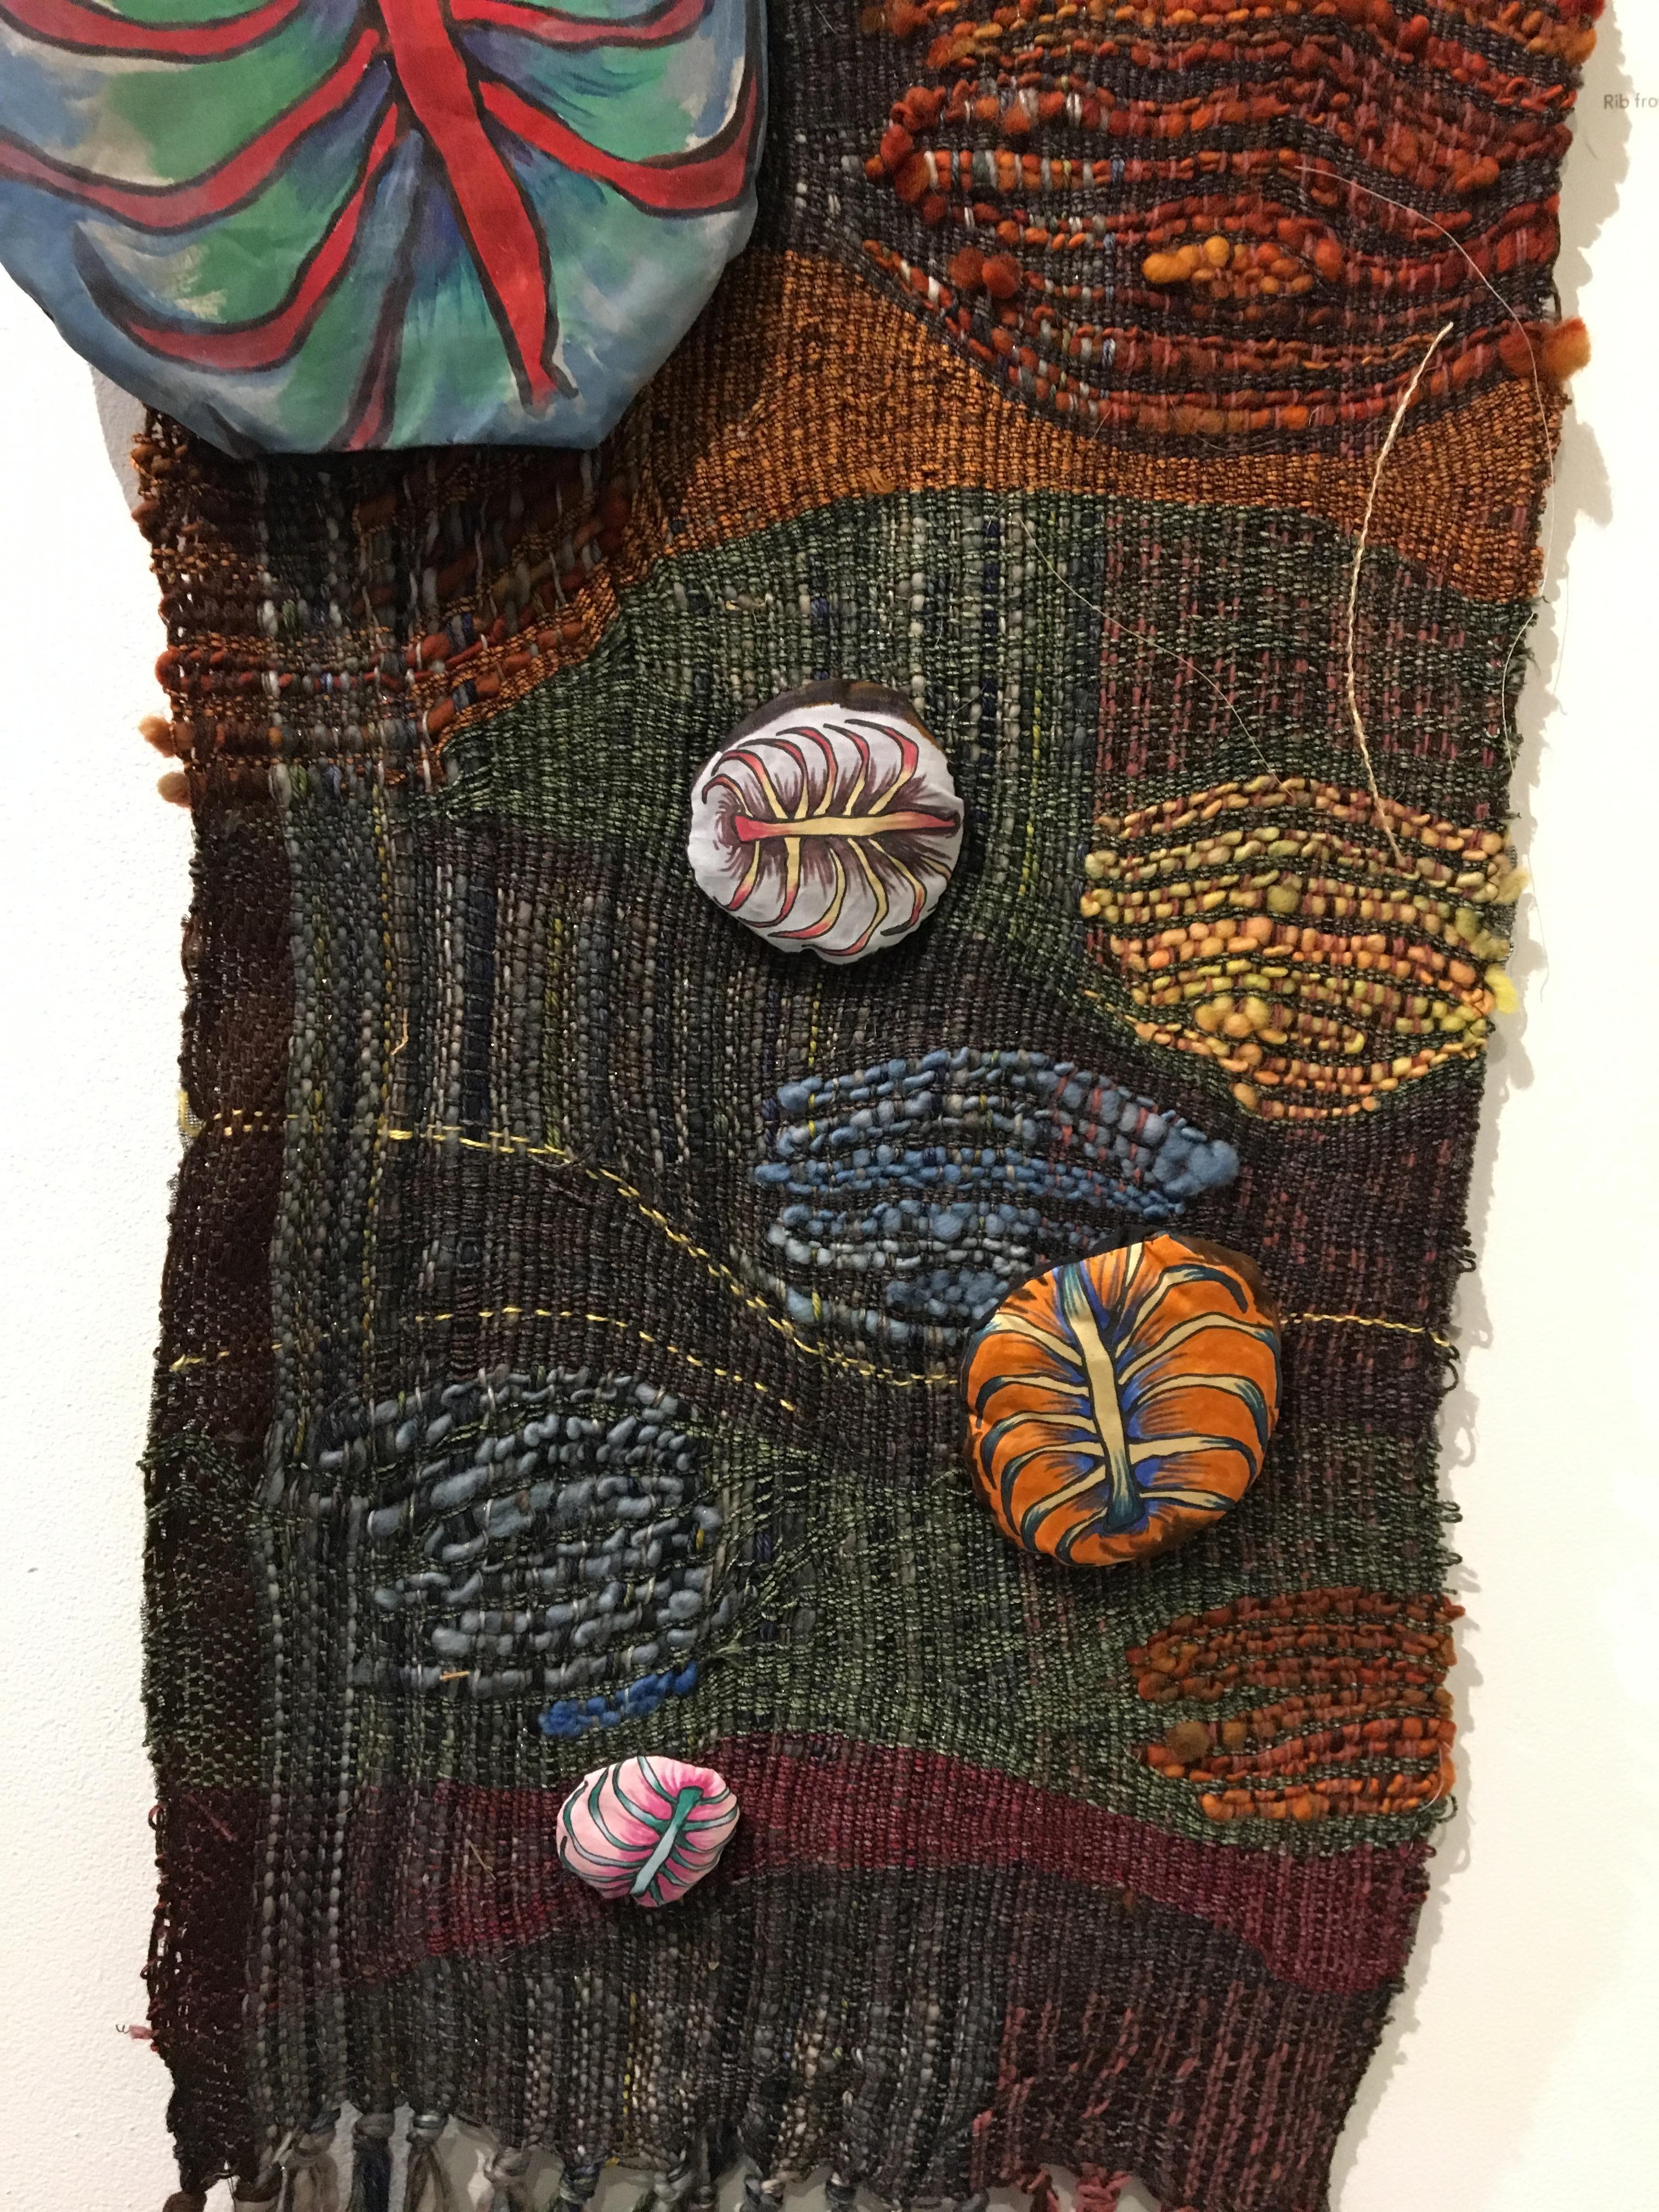 Juliet Martin makes her viewers see the message beyond the joke. Her satiric memoirs illustrate personal stories with playful forms, painful punchlines, and caustic visual one-liners. Why fiber? Weaving fabric physically and mentally attaches her to